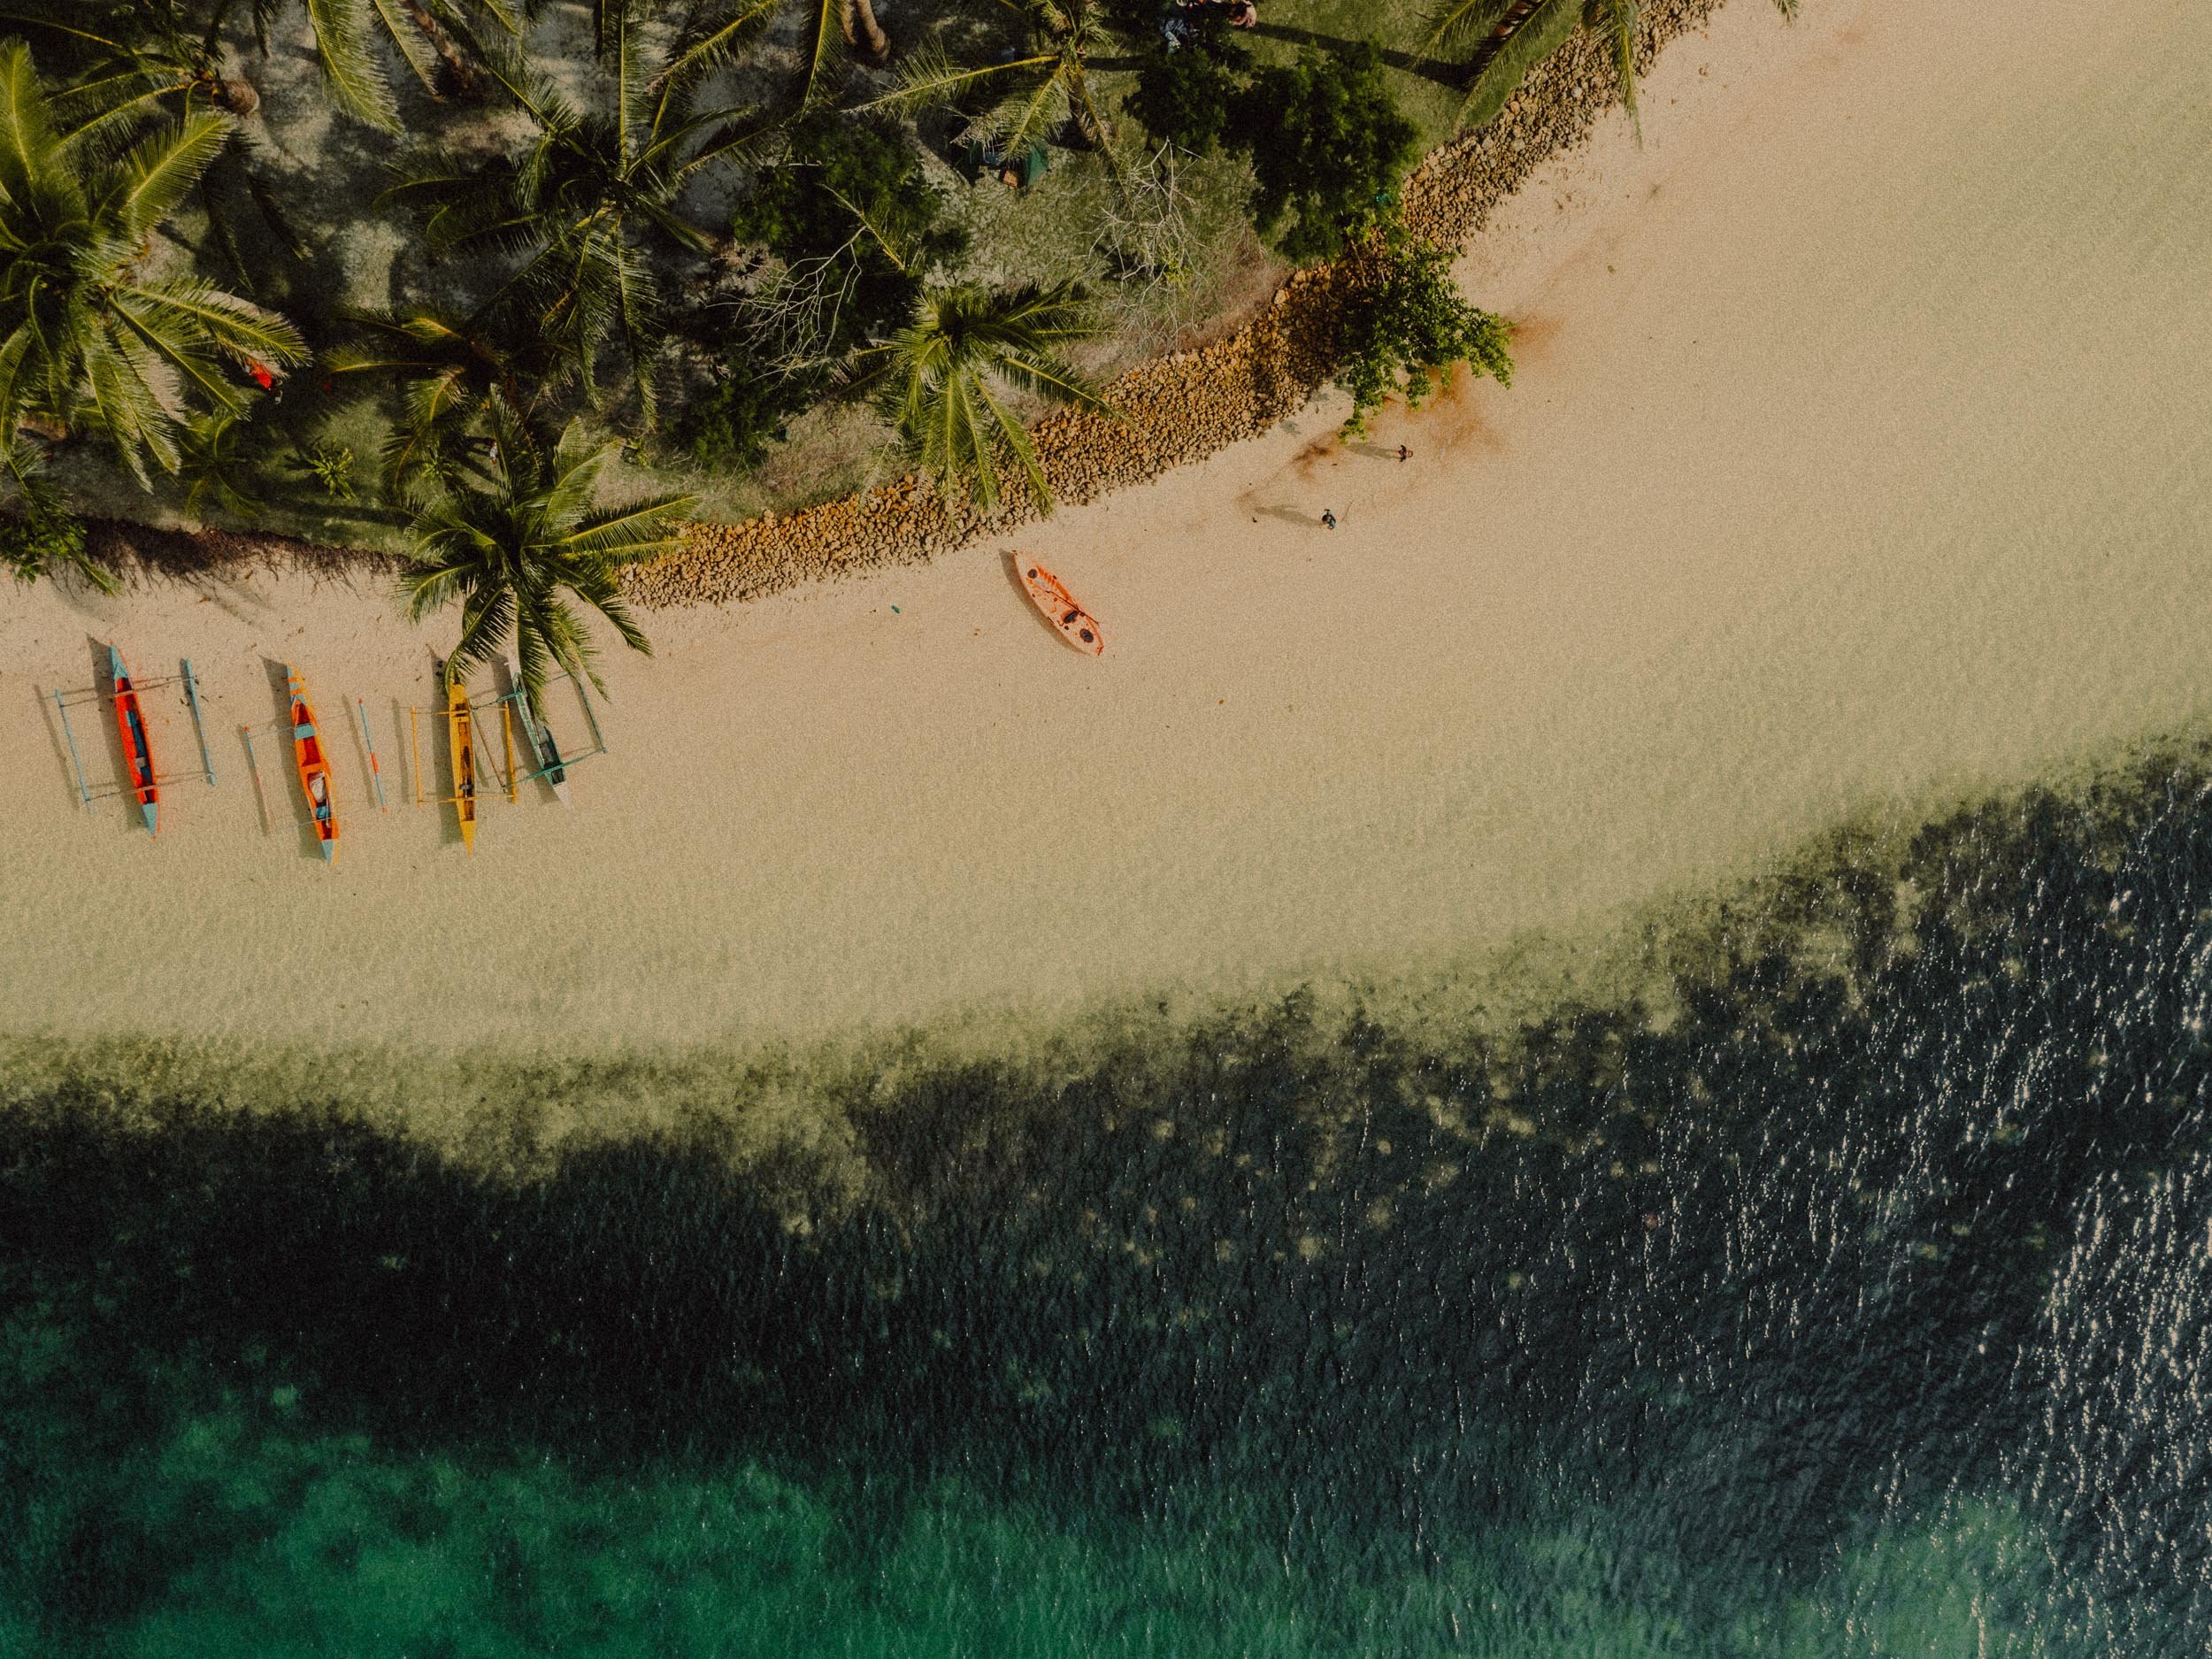 5-Siargao Drone Photography-A bird's-eye view aerial photo of Malinao Paradise, Siargao, Philippines, Southeast Asia, April 2022, Mavic 2 Pro, Hasselblad L1D-20c.jpg